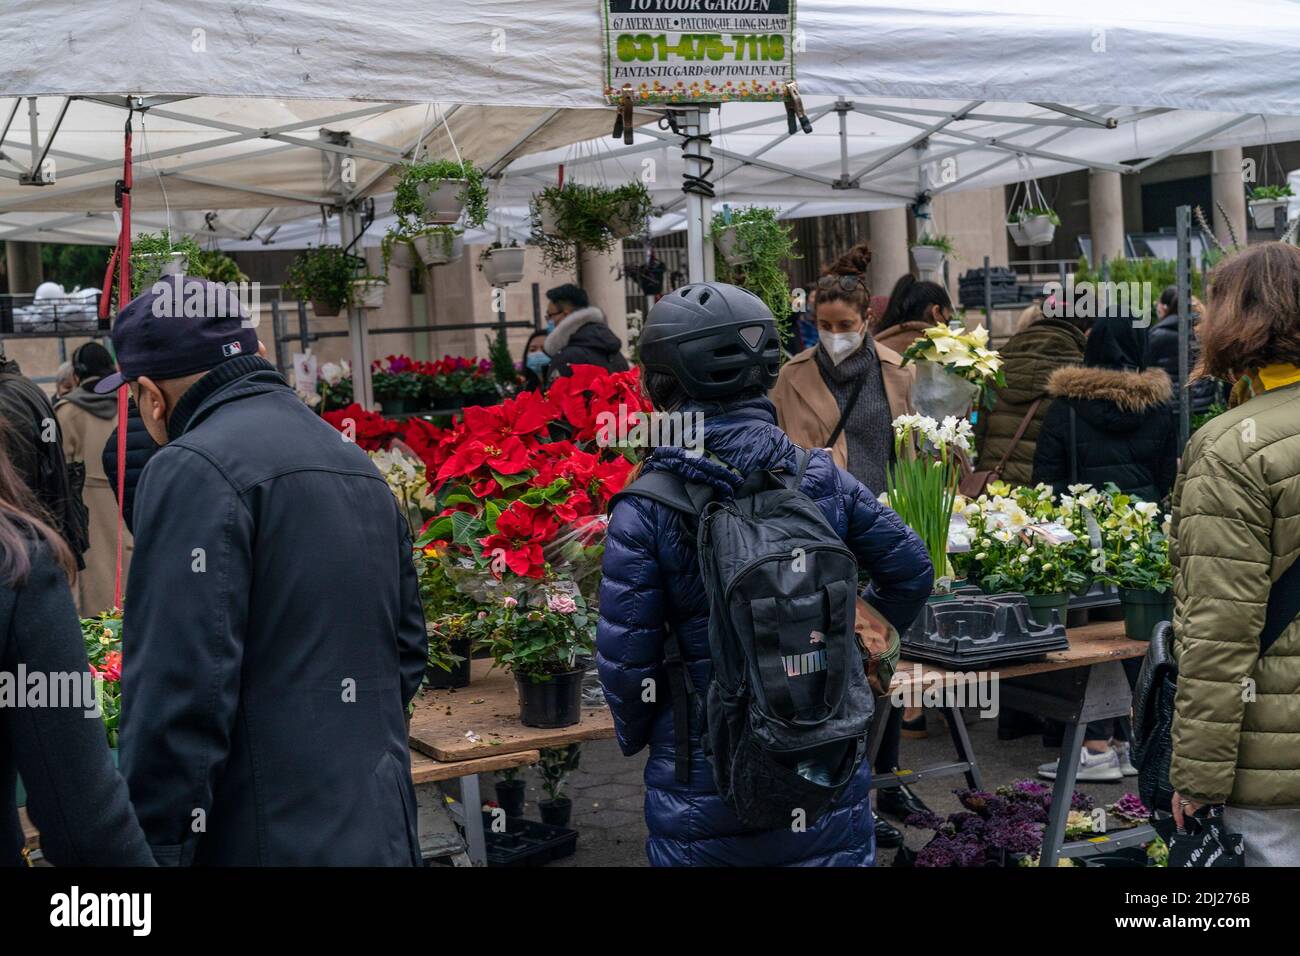 New York, United States. 12th Dec, 2020. People shopping during Holiday season at Union Square farmers market in New York on December 12, 2020. Because of COVID-19 pandemia everyone is seen wearing face masks. (Photo by Lev Radin/Sipa USA) Credit: Sipa USA/Alamy Live News Stock Photo